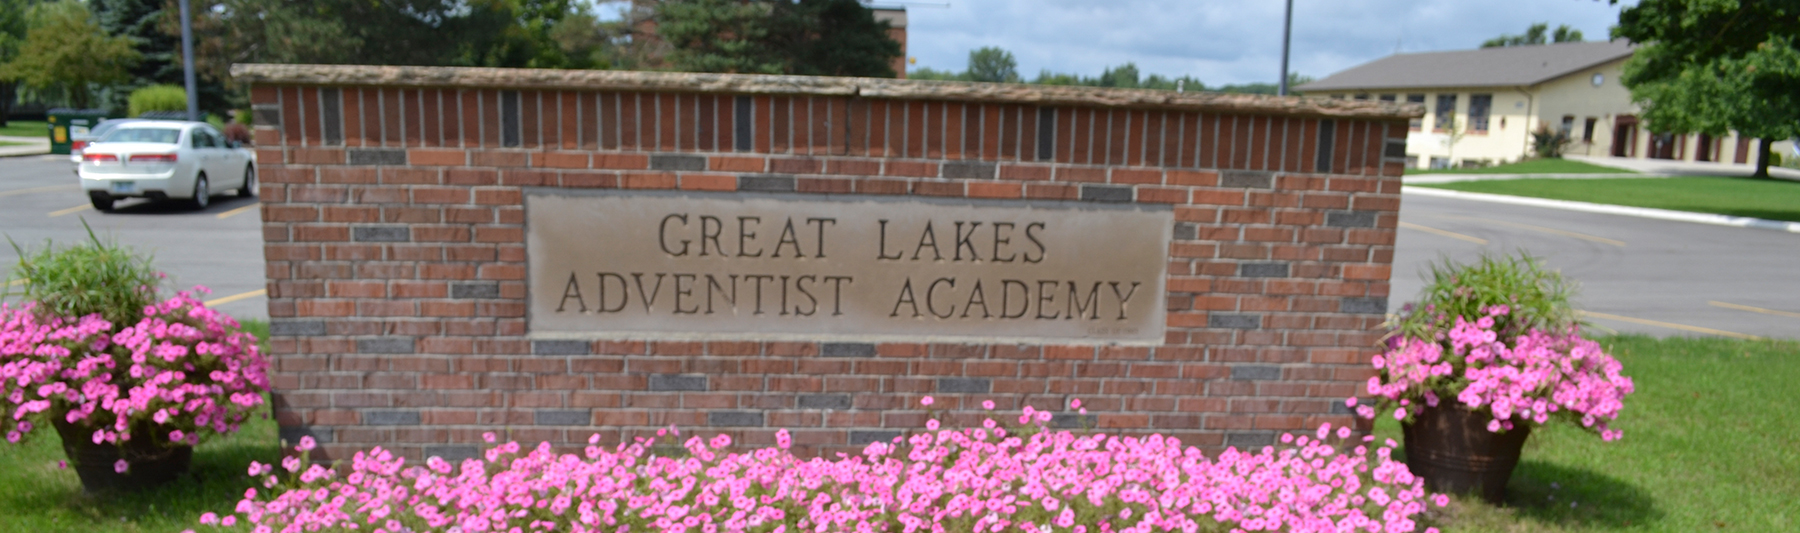 Make A Payment - Great Lakes Adventist Academy